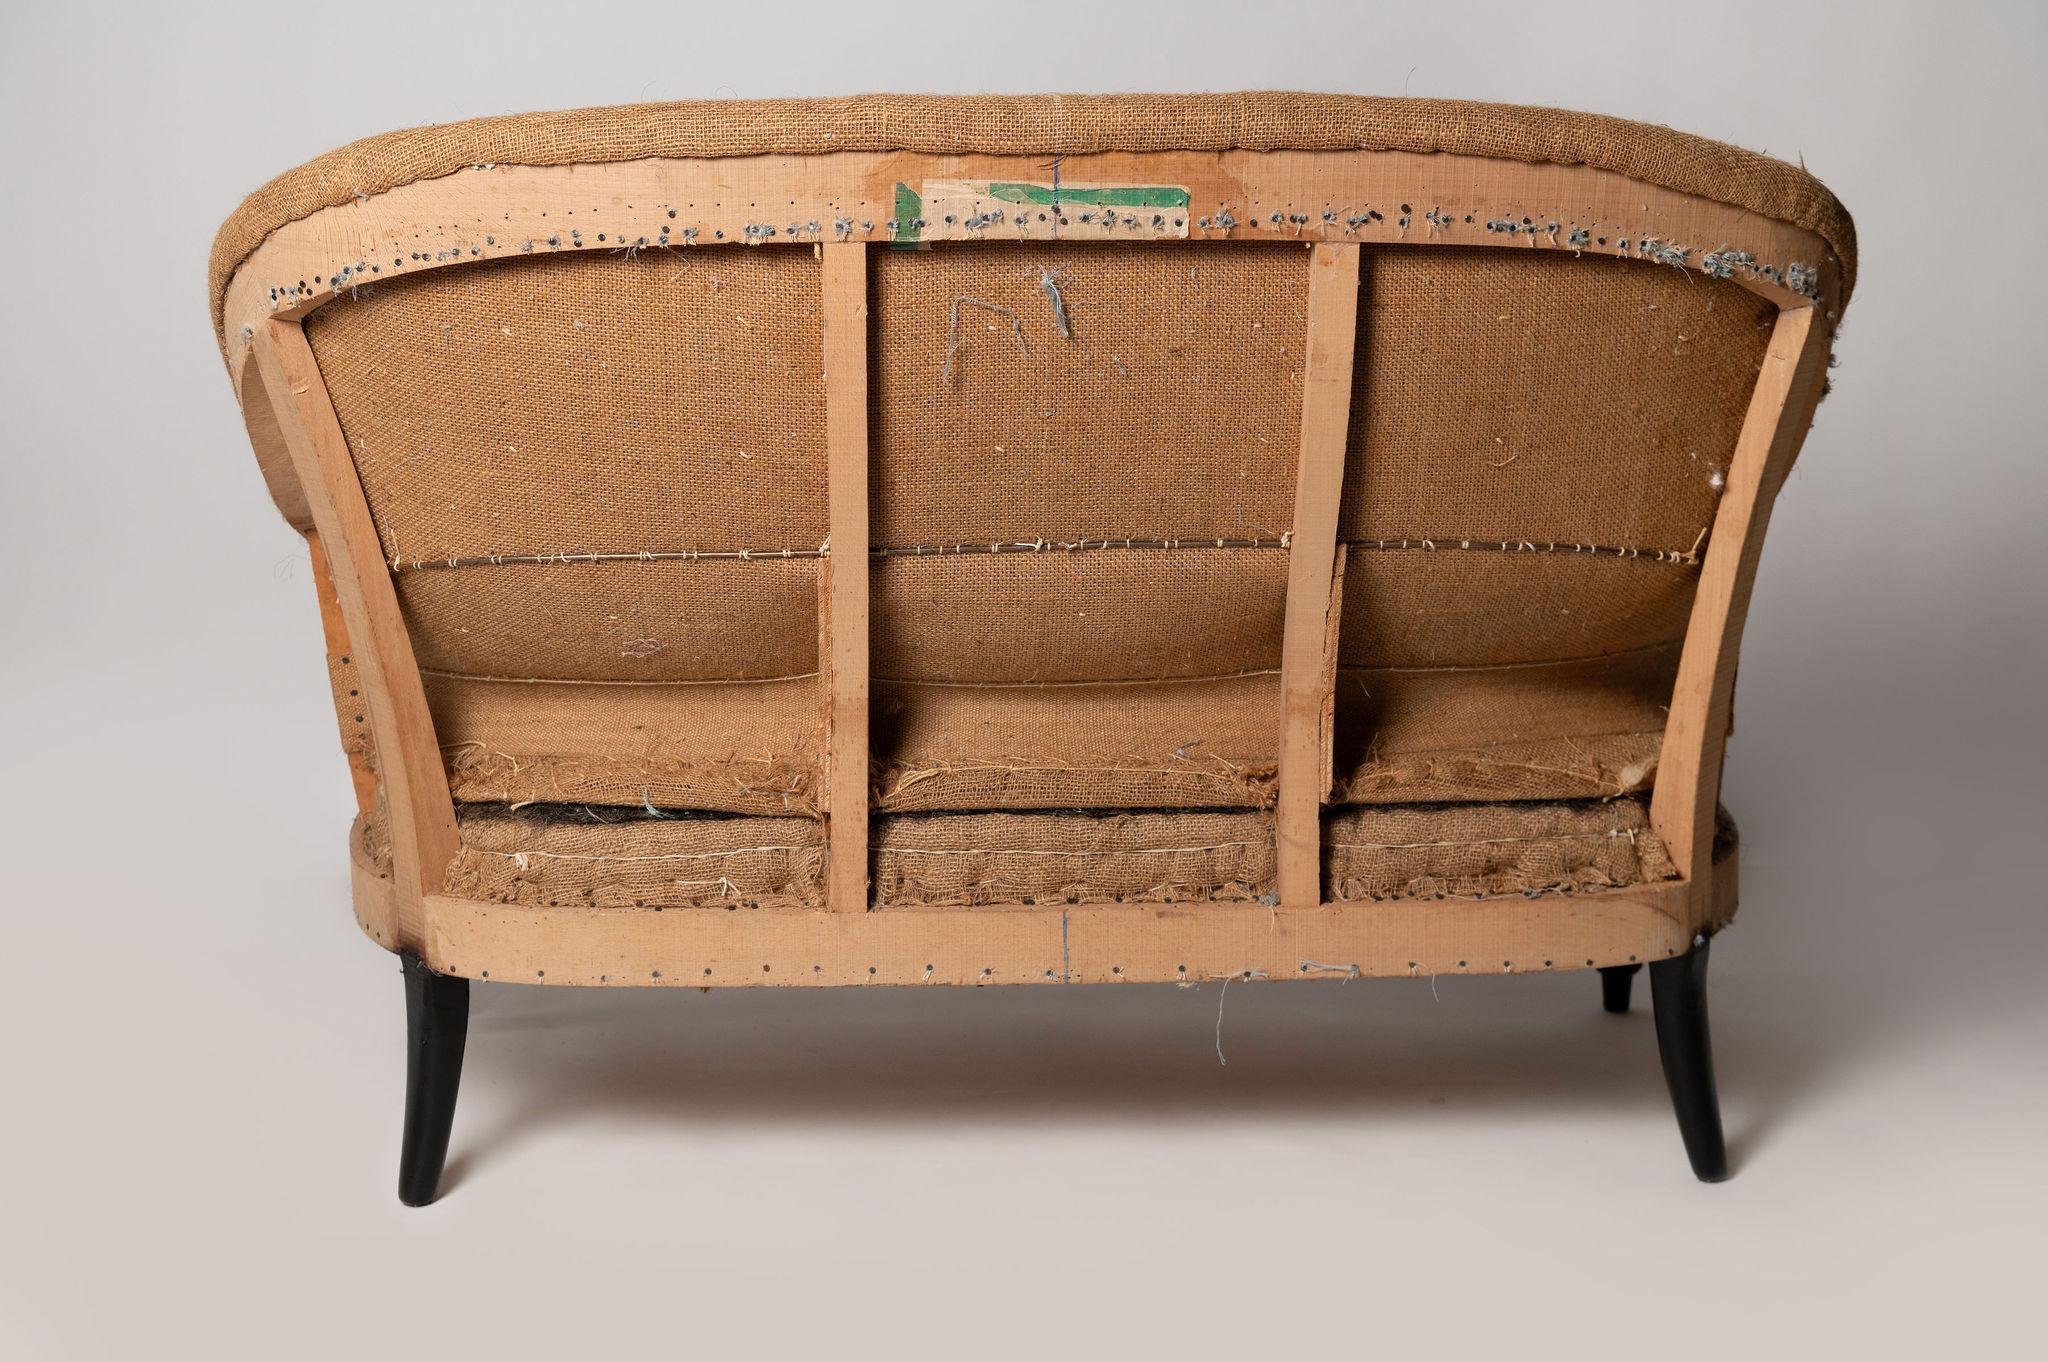 20th Century Antique French sofa, for upholstery, horsehair stuffing, C1910